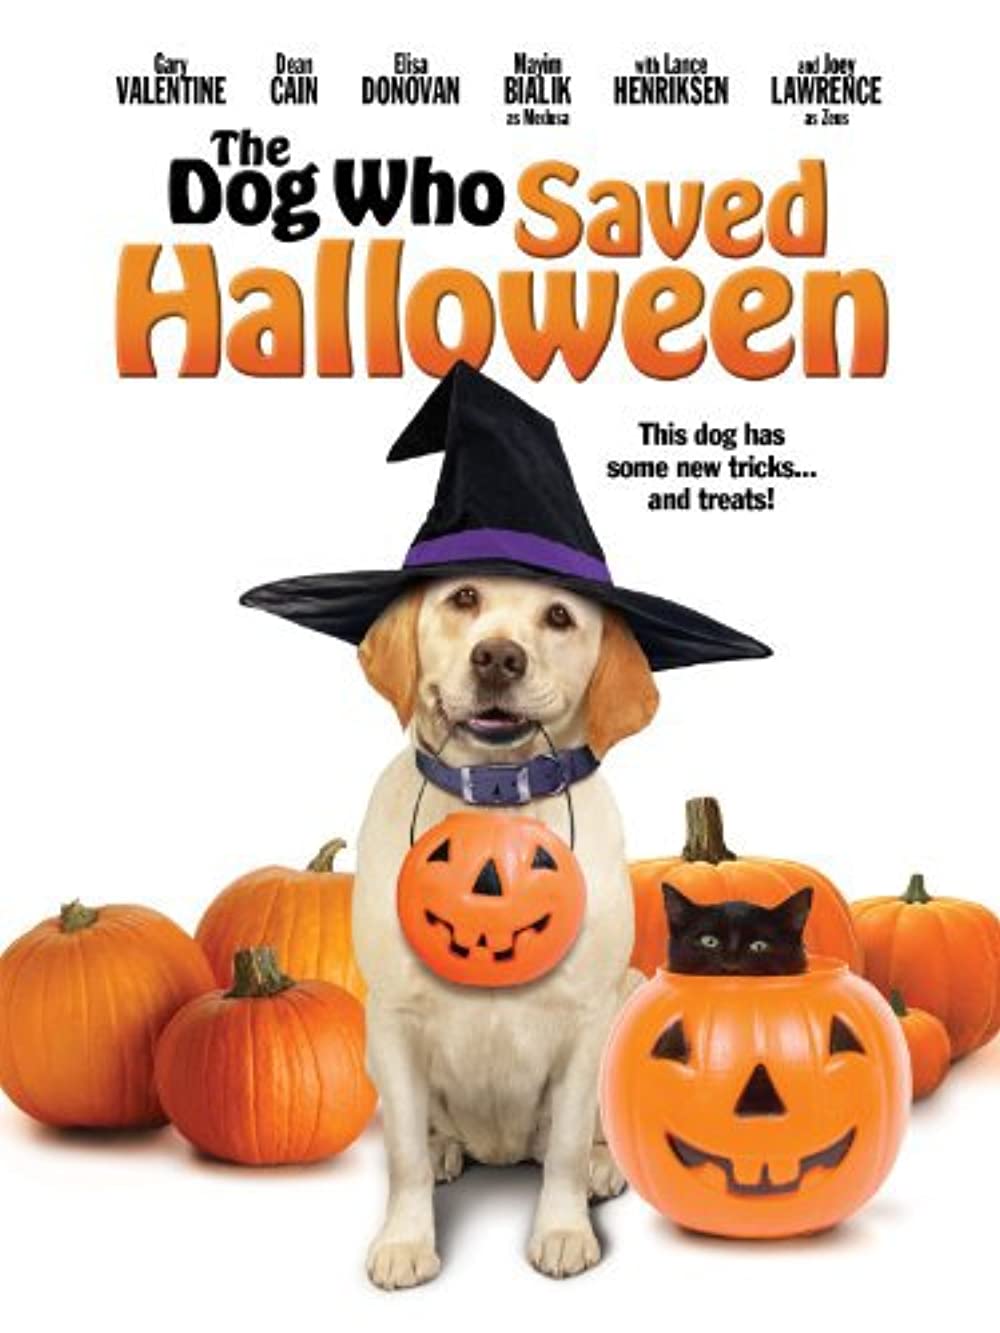 Download The Dog Who Saved Halloween Movie | The Dog Who Saved Halloween